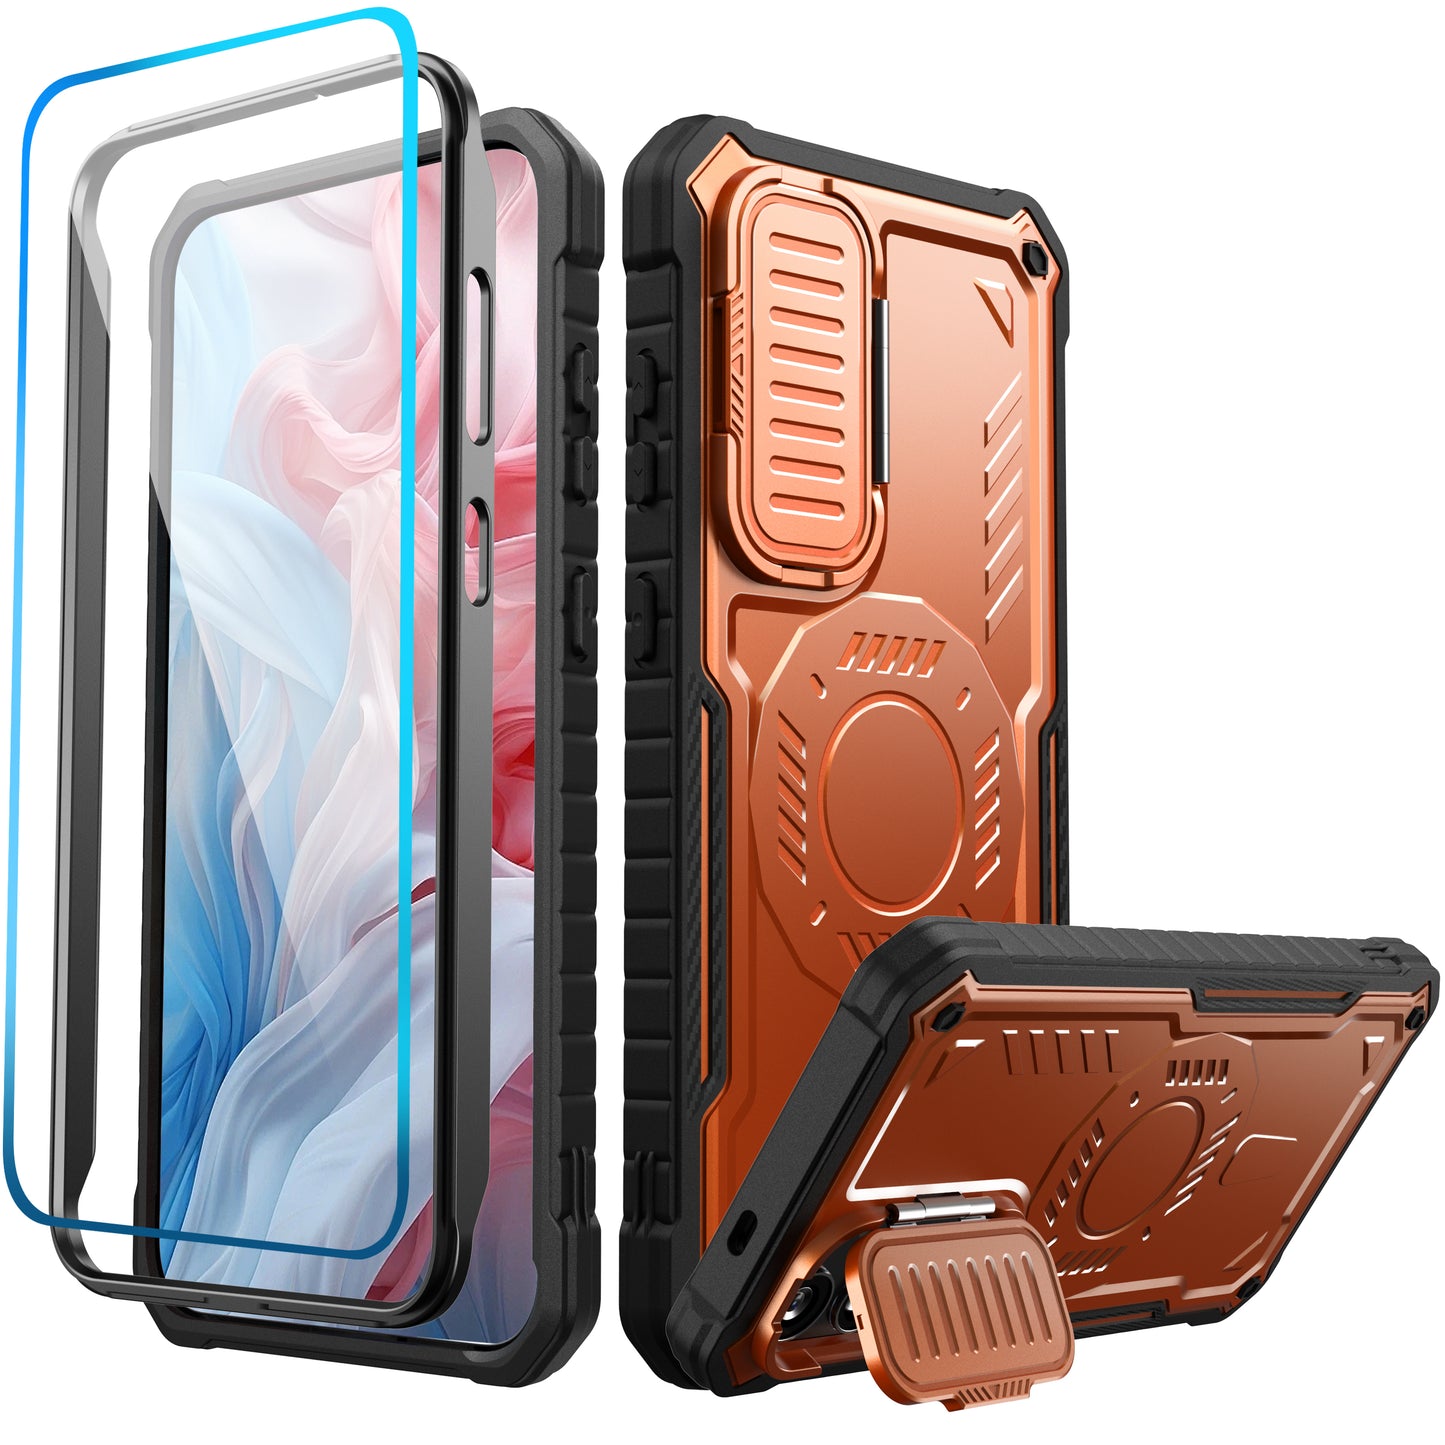 FITO for Samsung Galaxy A15 Case with Screen Protector, Military Grade Shockproof Phone Case with Camera Cover and Kickstand